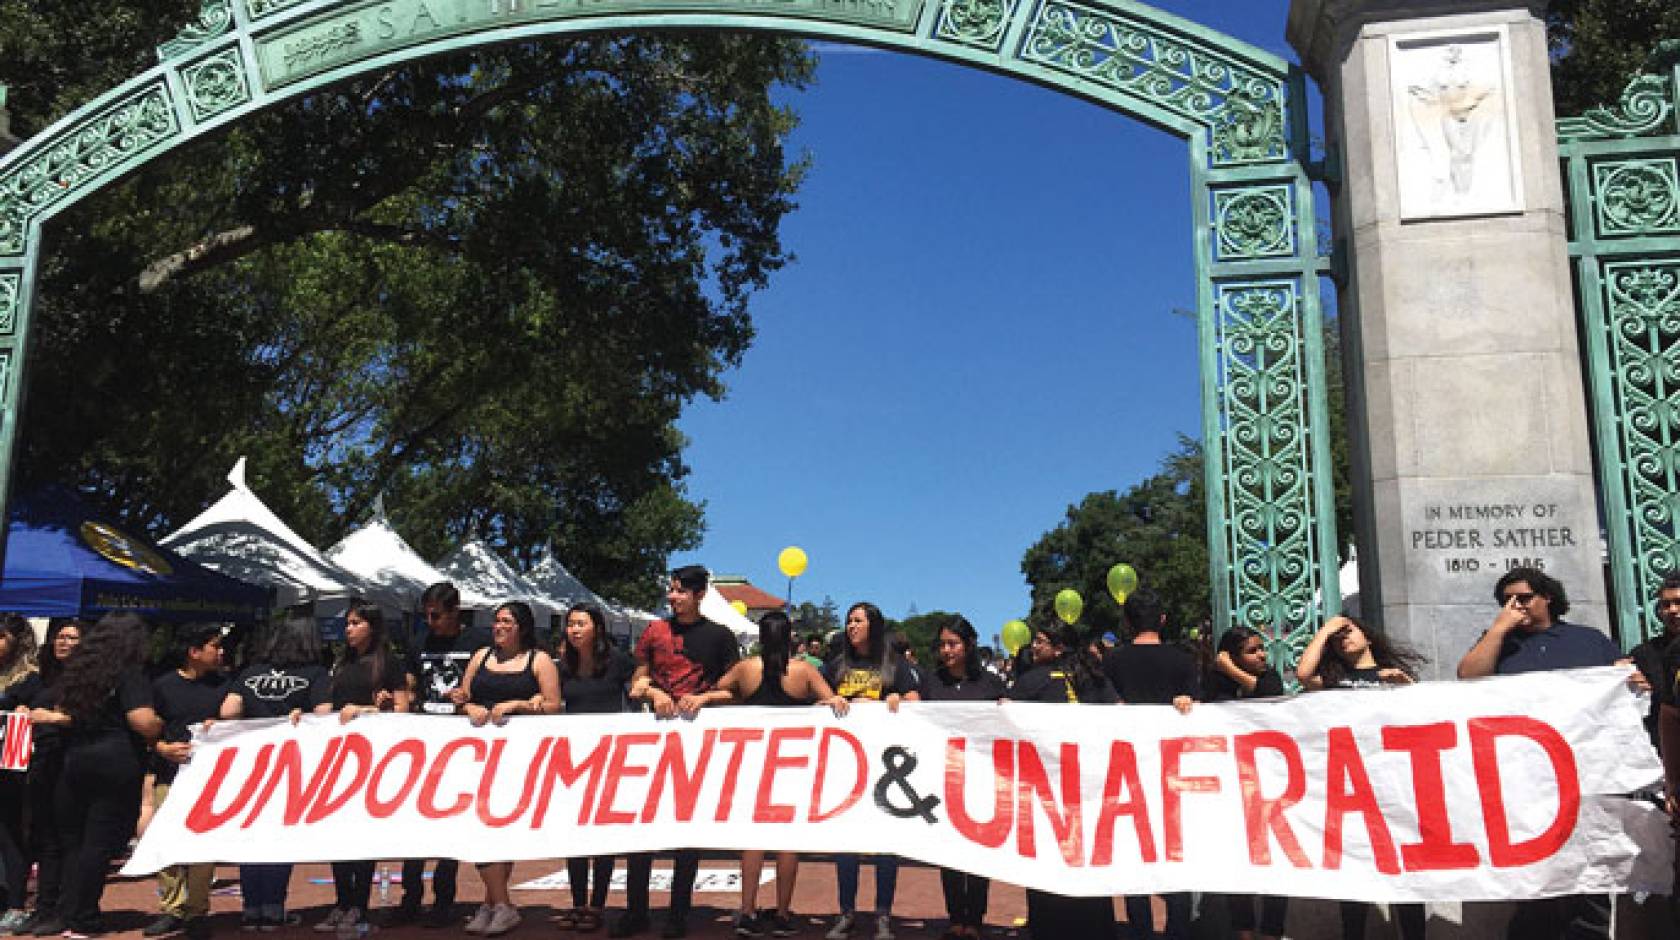 UC Berkeley undocumented students and supporters demonstrate outside of Sather Gate.